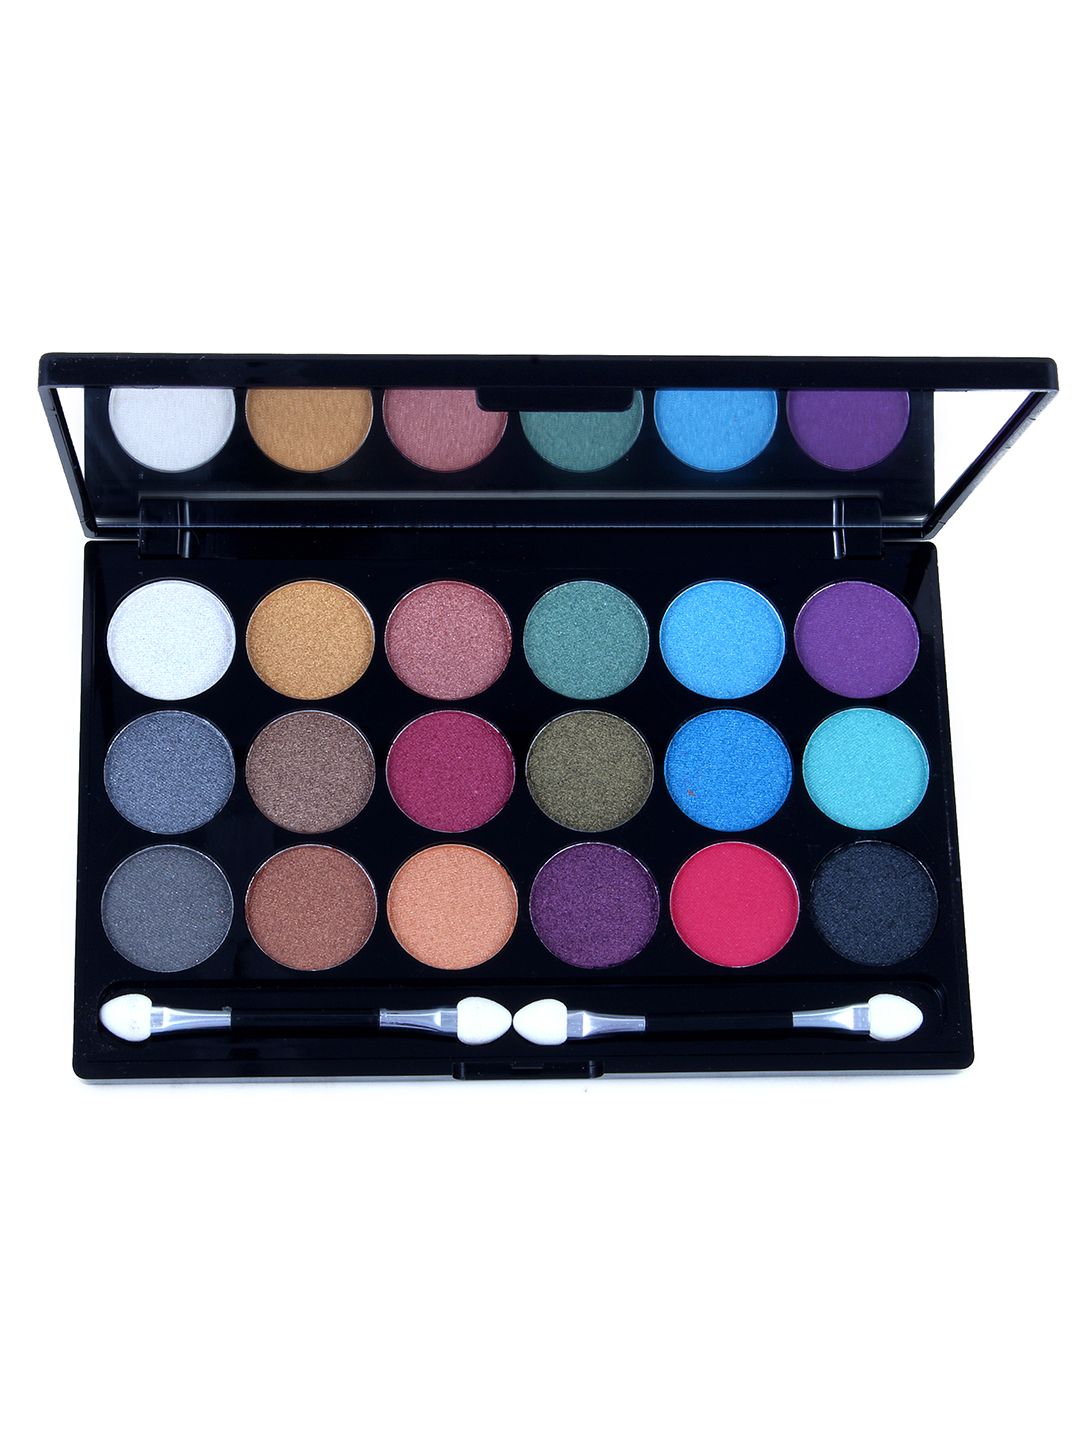 INCOLOR 18-In-1 Eyeshadow Kit 01 - 25 g Price in India